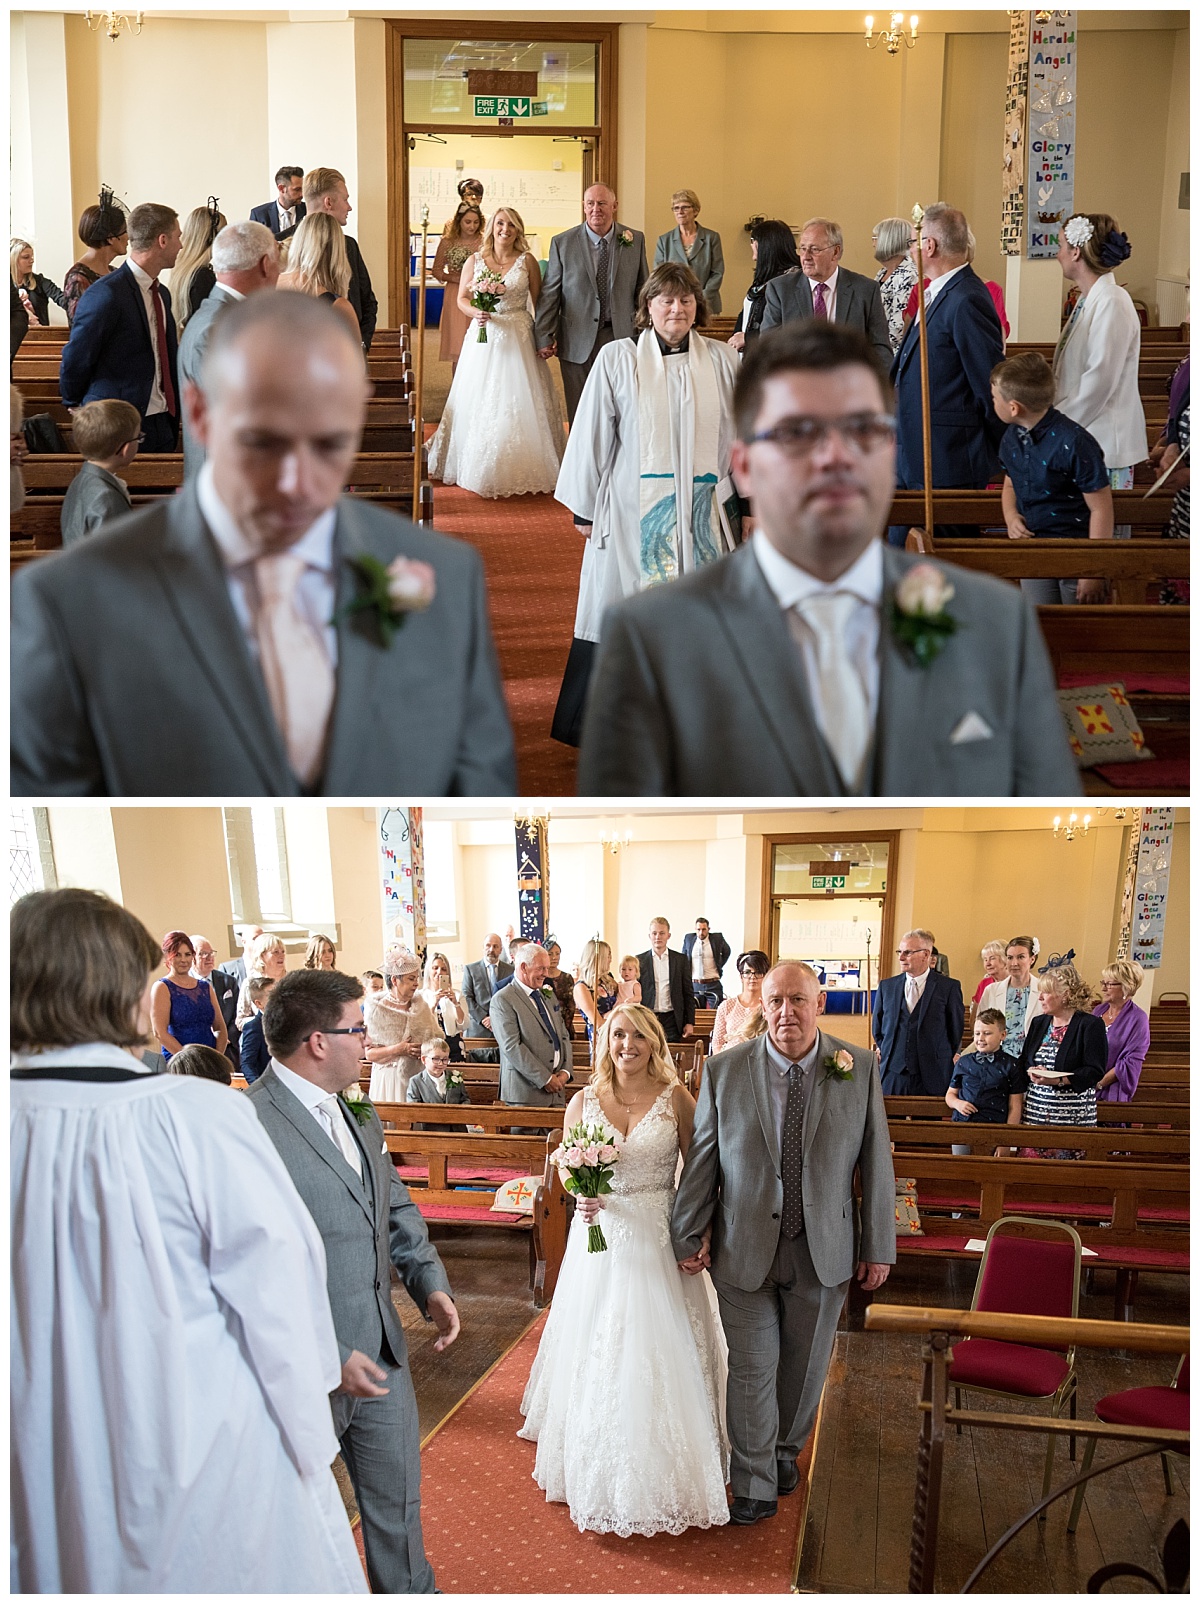 Wedding Photography Manchester - Lisa and James's The Three Horseshoes Country Inn wedding 15